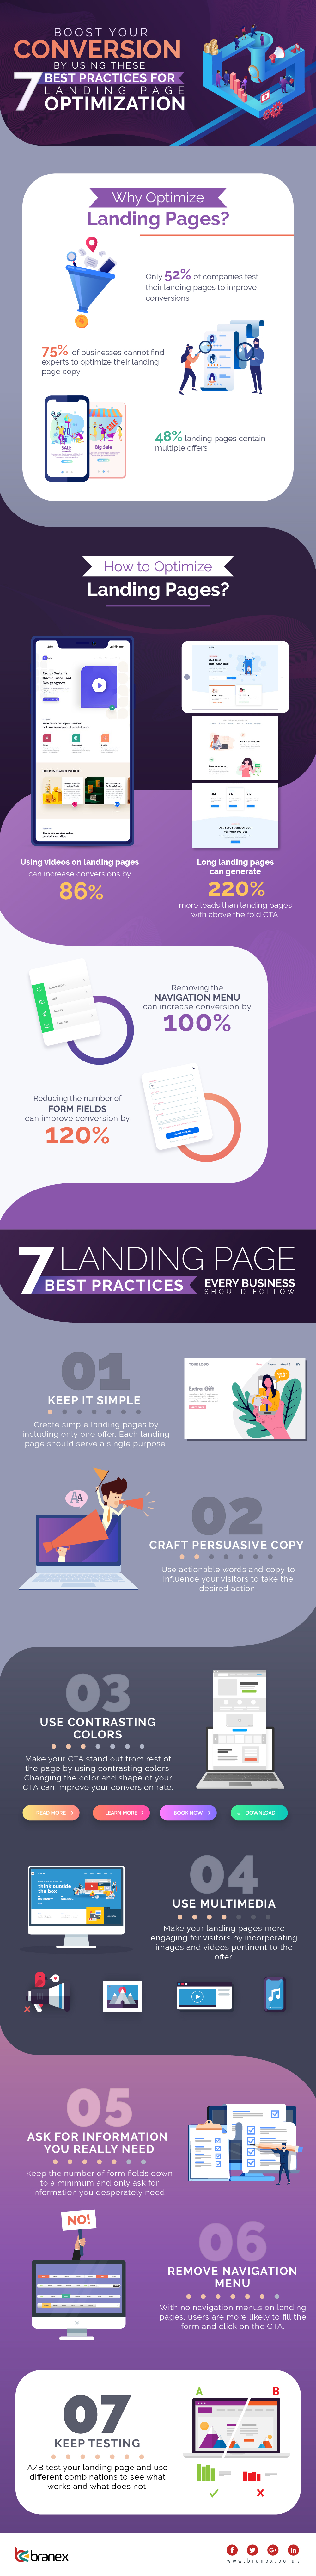 Infographic with landing page best practices to boost conversion rates on your site.